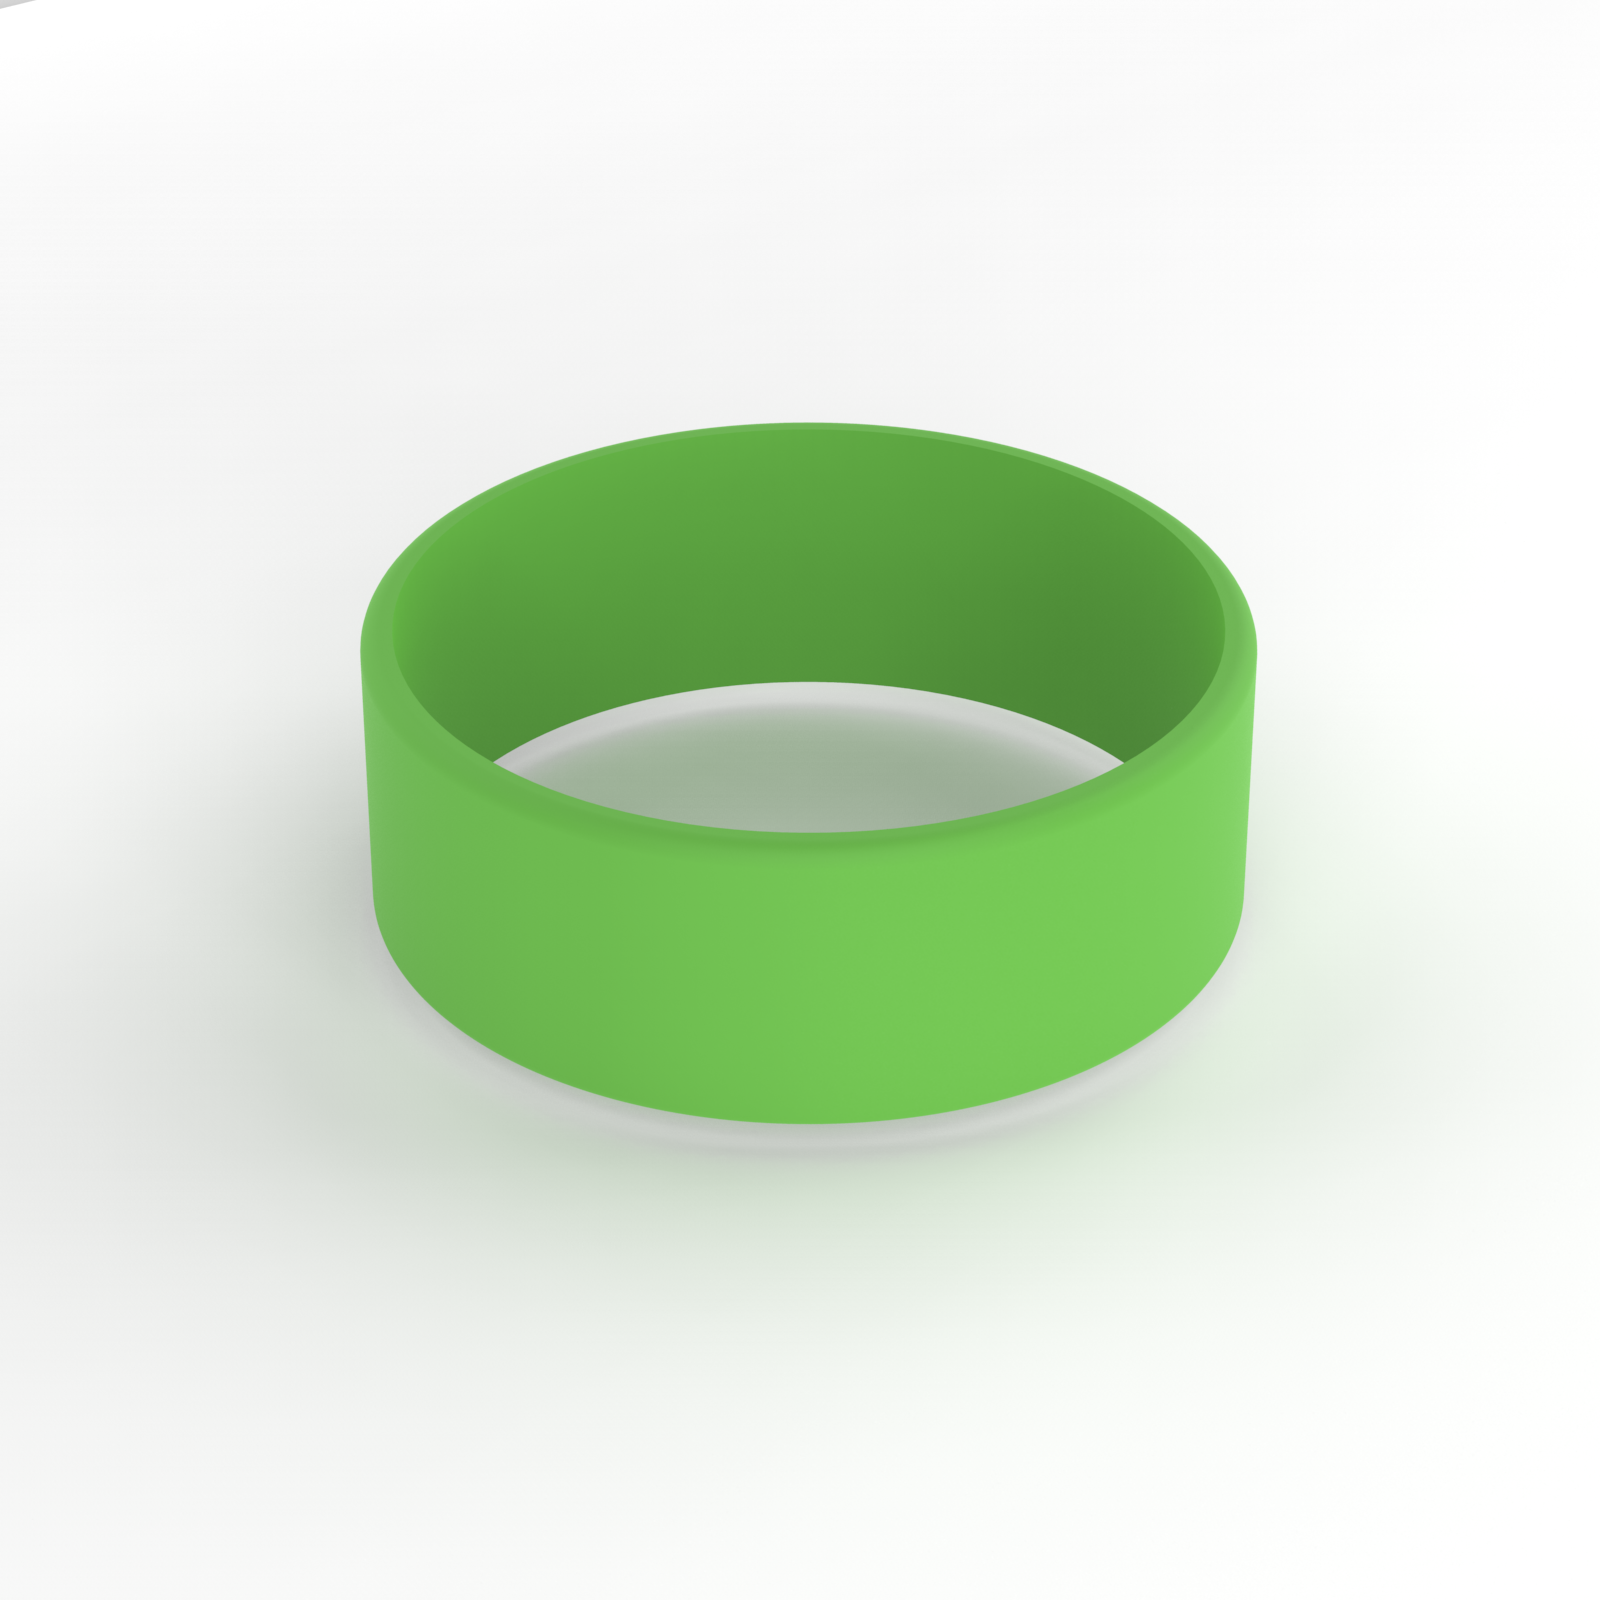 Rubber Bracelets (Pack of 10) Mixed (5 Green/5 Gray)